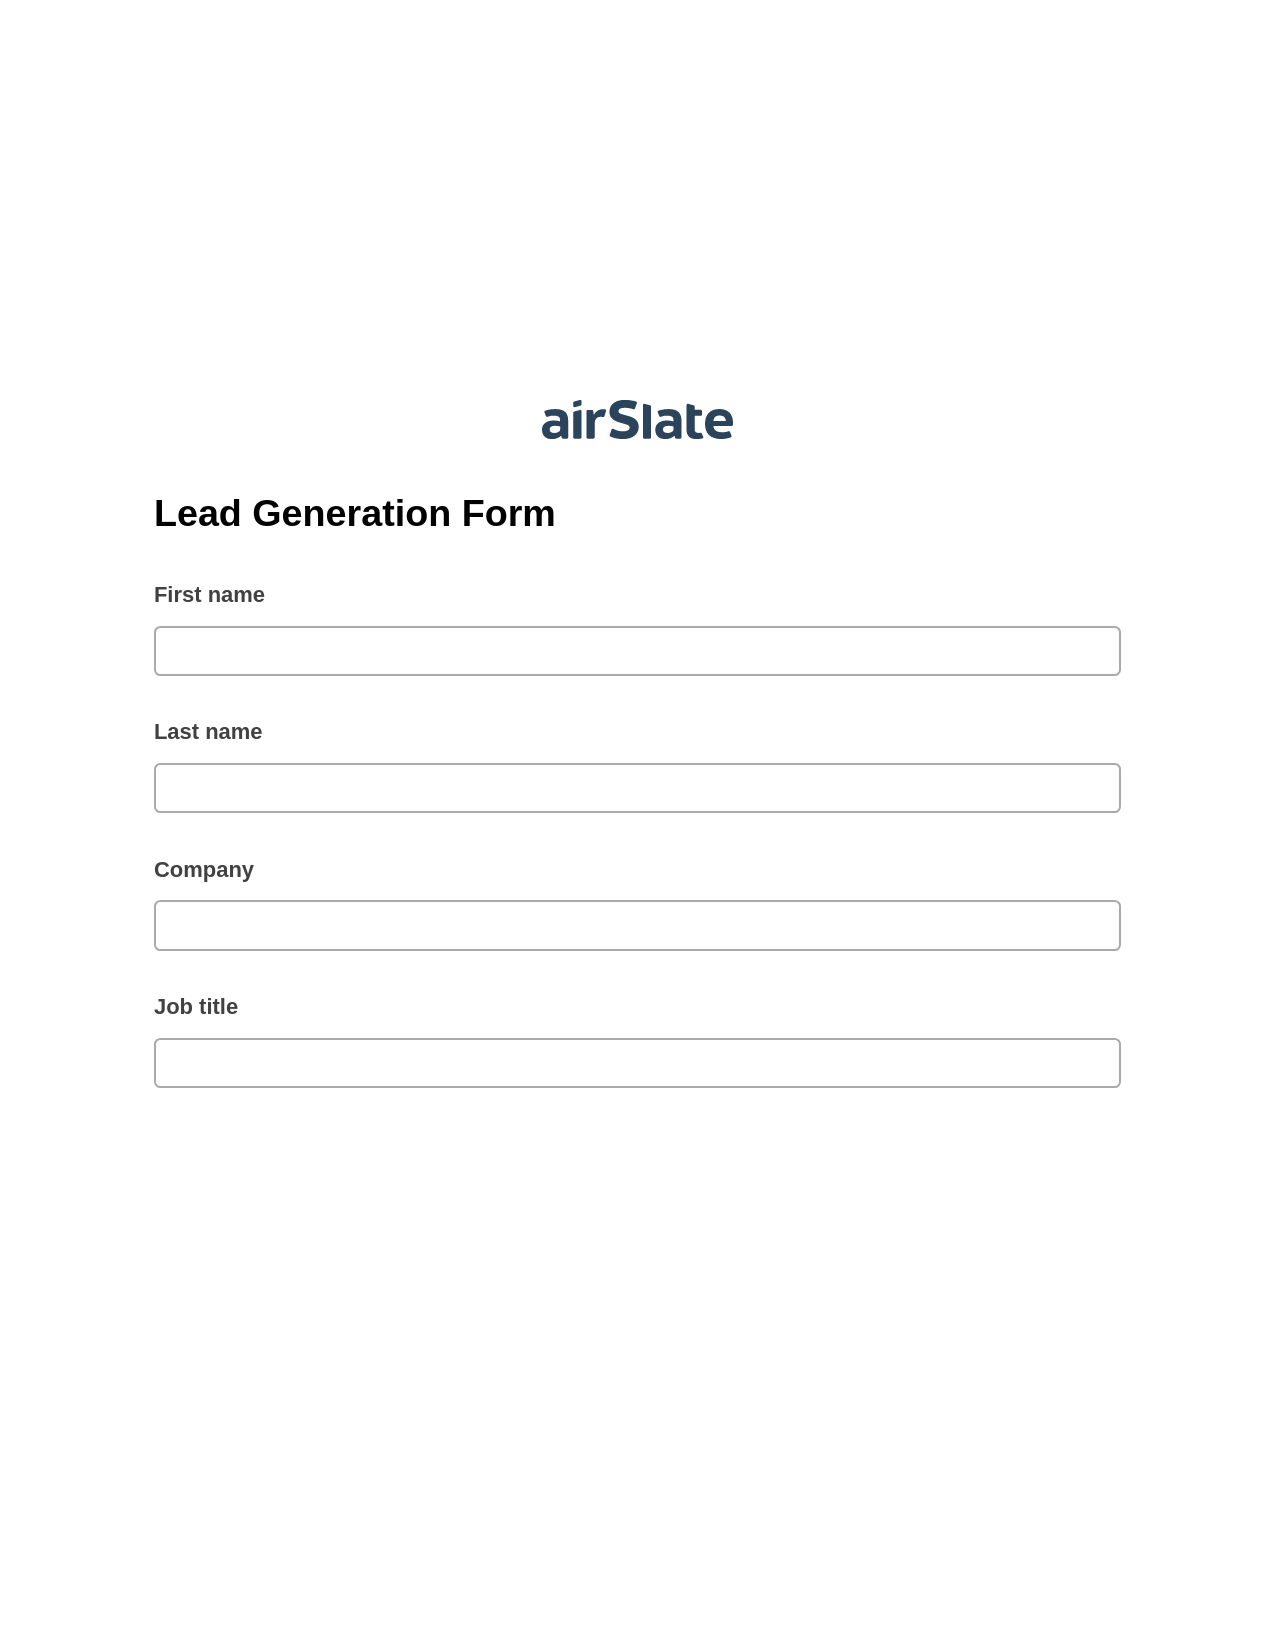 Lead Generation Form Pre-fill from Salesforce Records with SOQL Bot, System Bot - Create a Slate in another Flow, Export to MySQL Bot